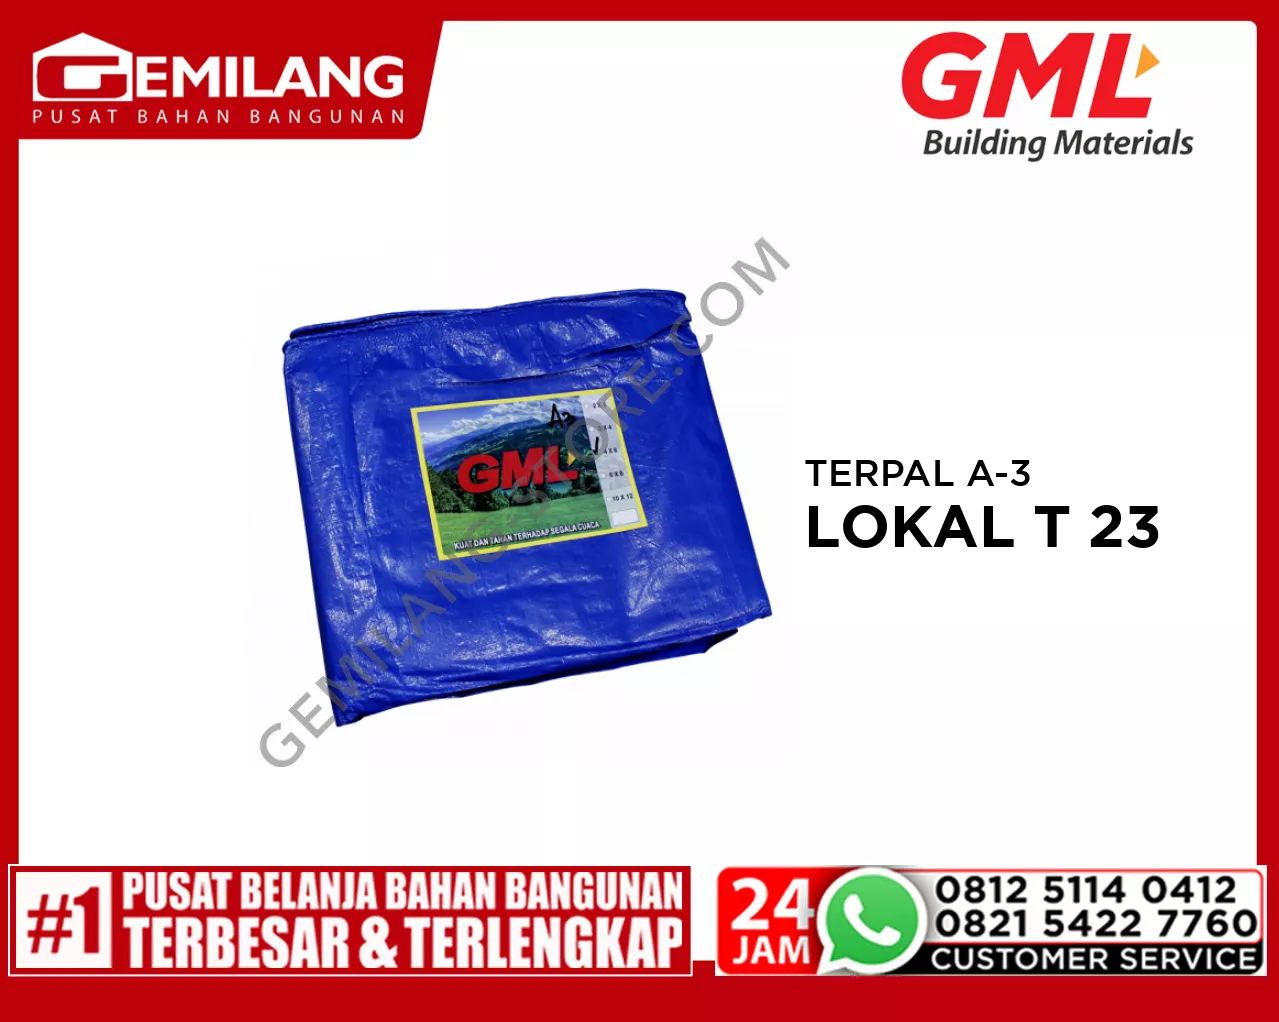 TERPAL A-3 LOKAL T 23